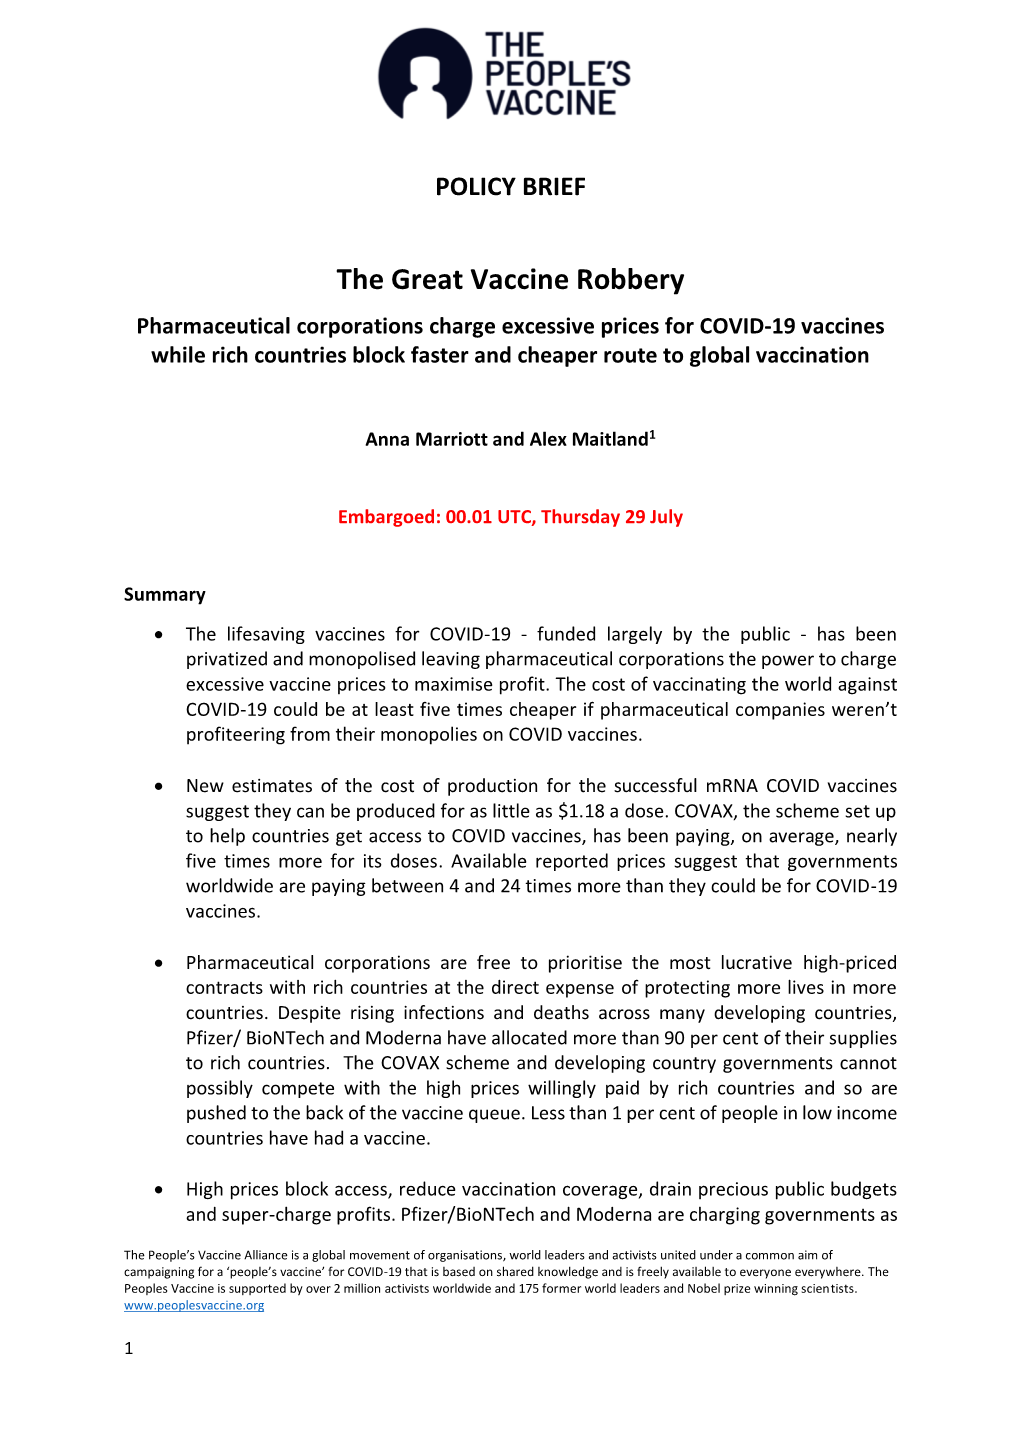 The Great Vaccine Robbery